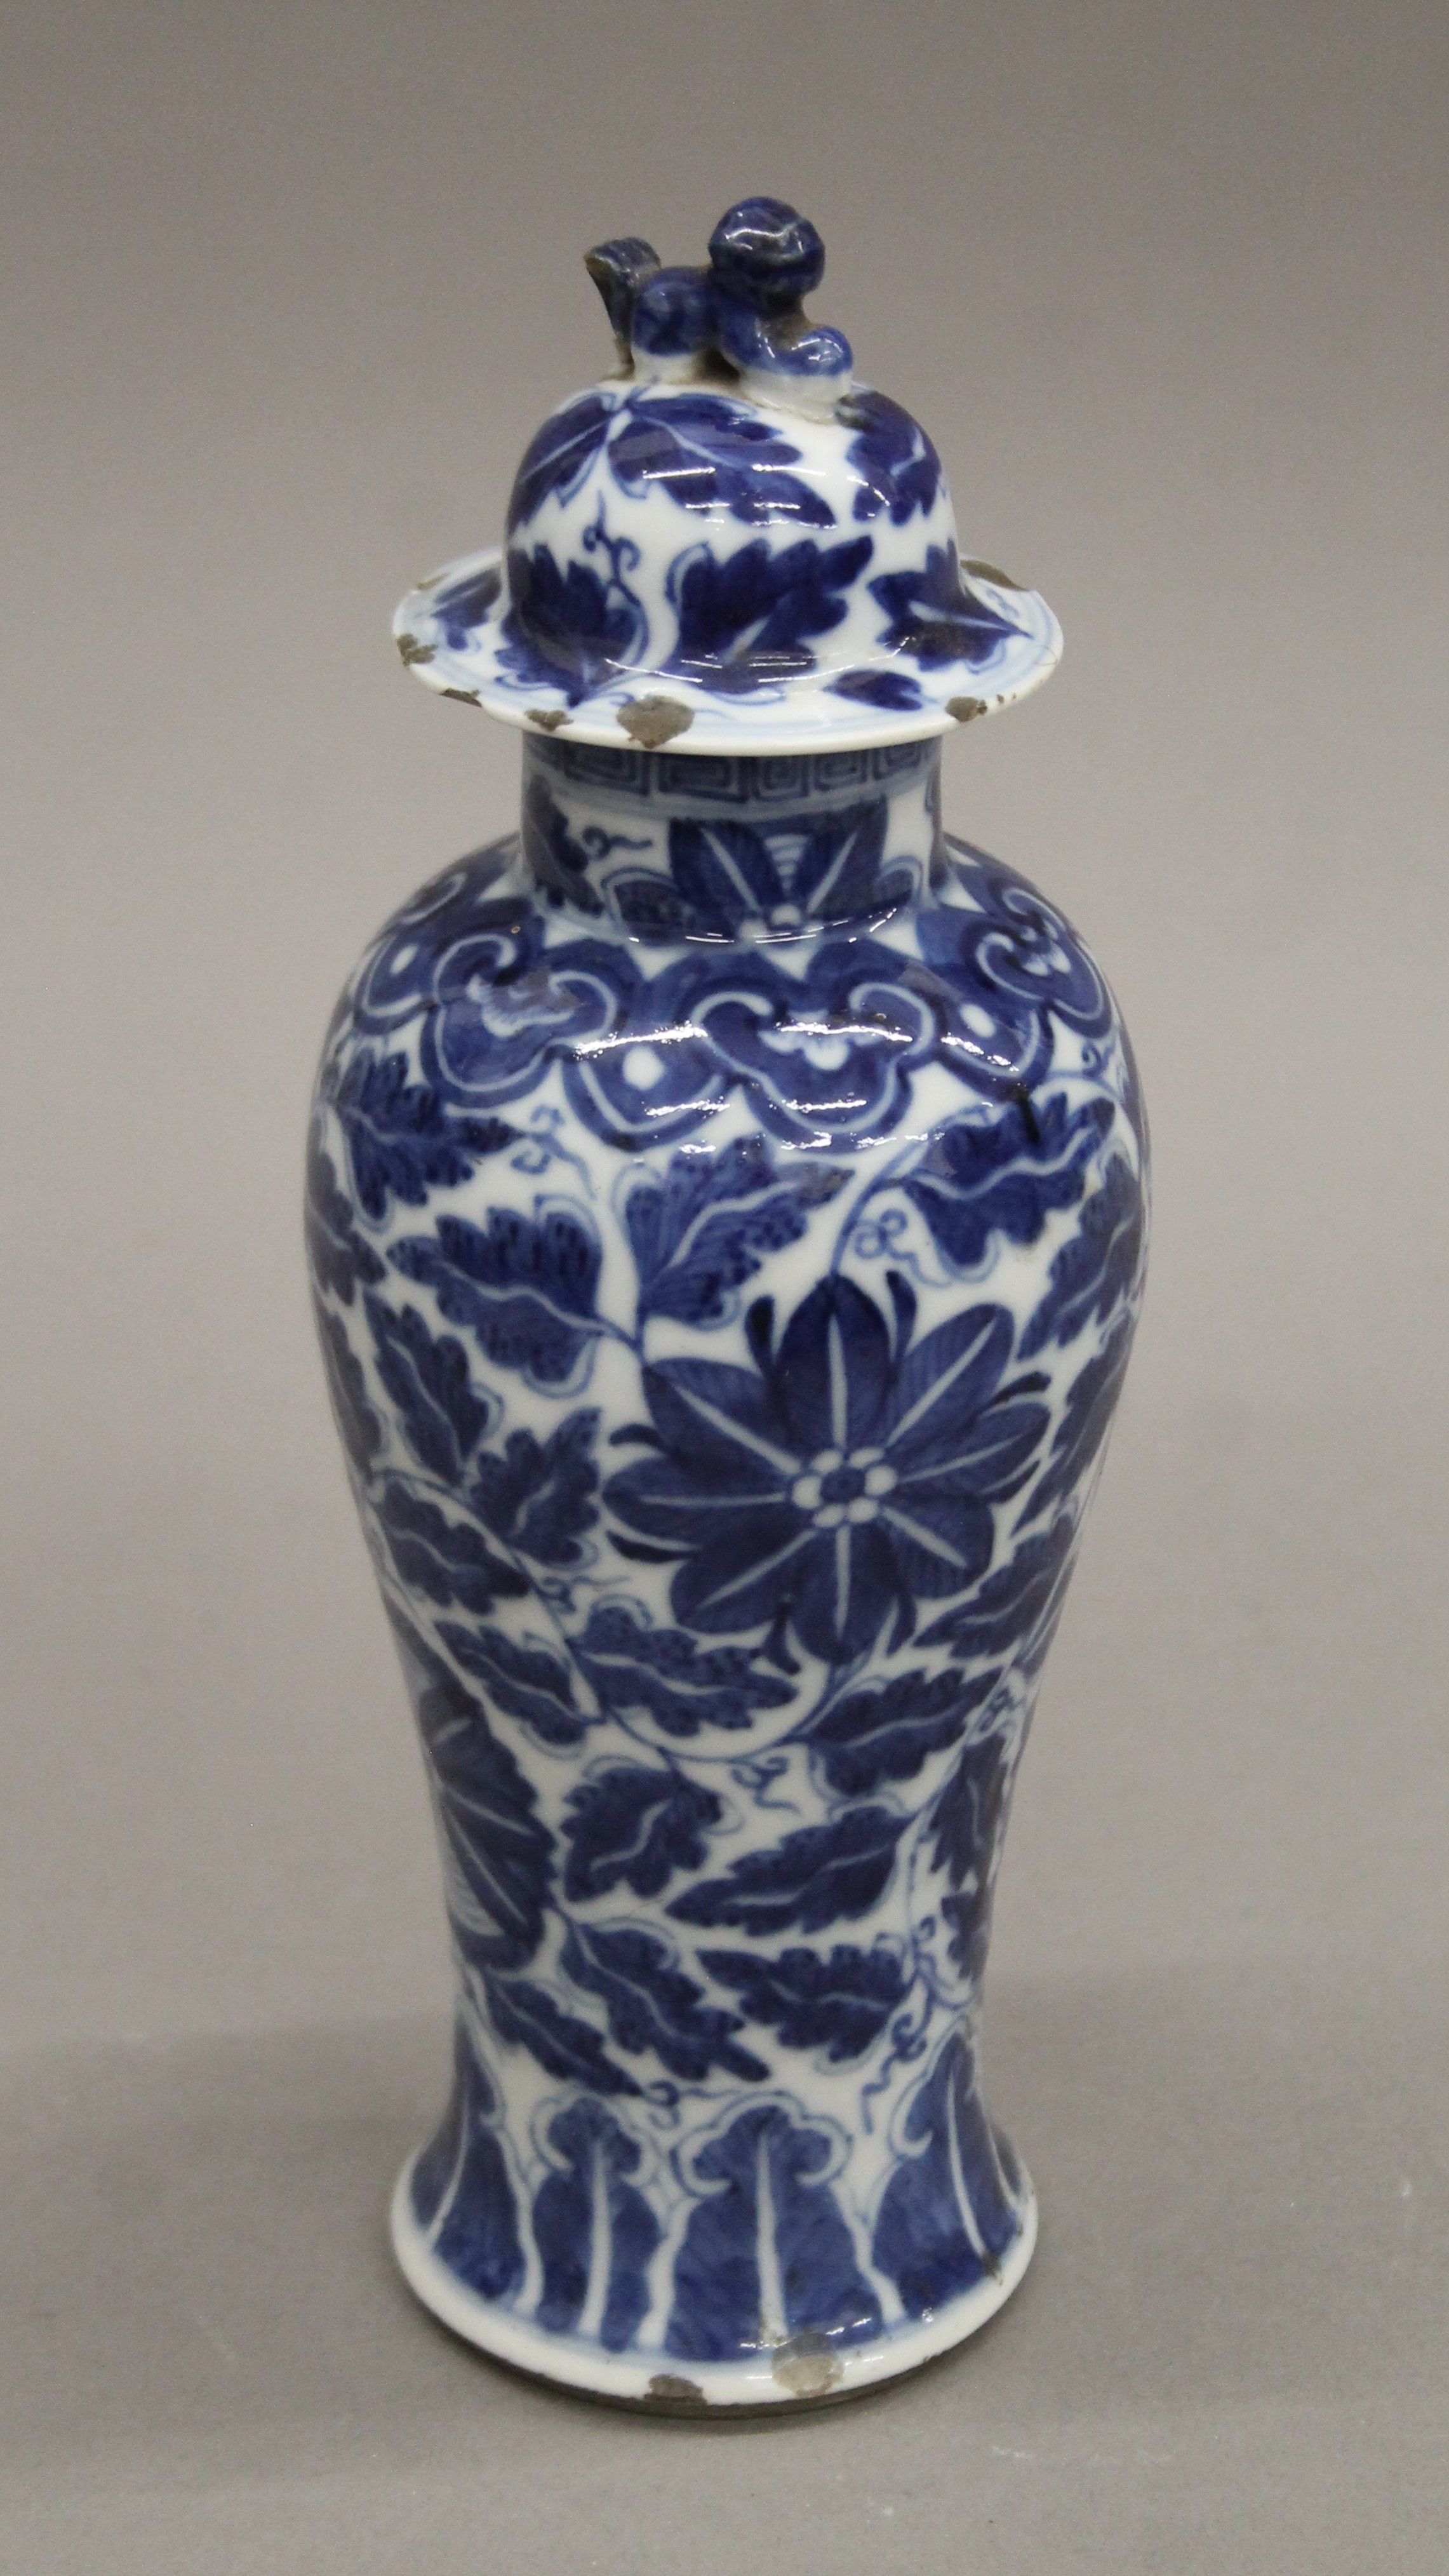 Two 19th century Chinese blue and white porcelain vases. The largest 22 cm high. - Image 7 of 10